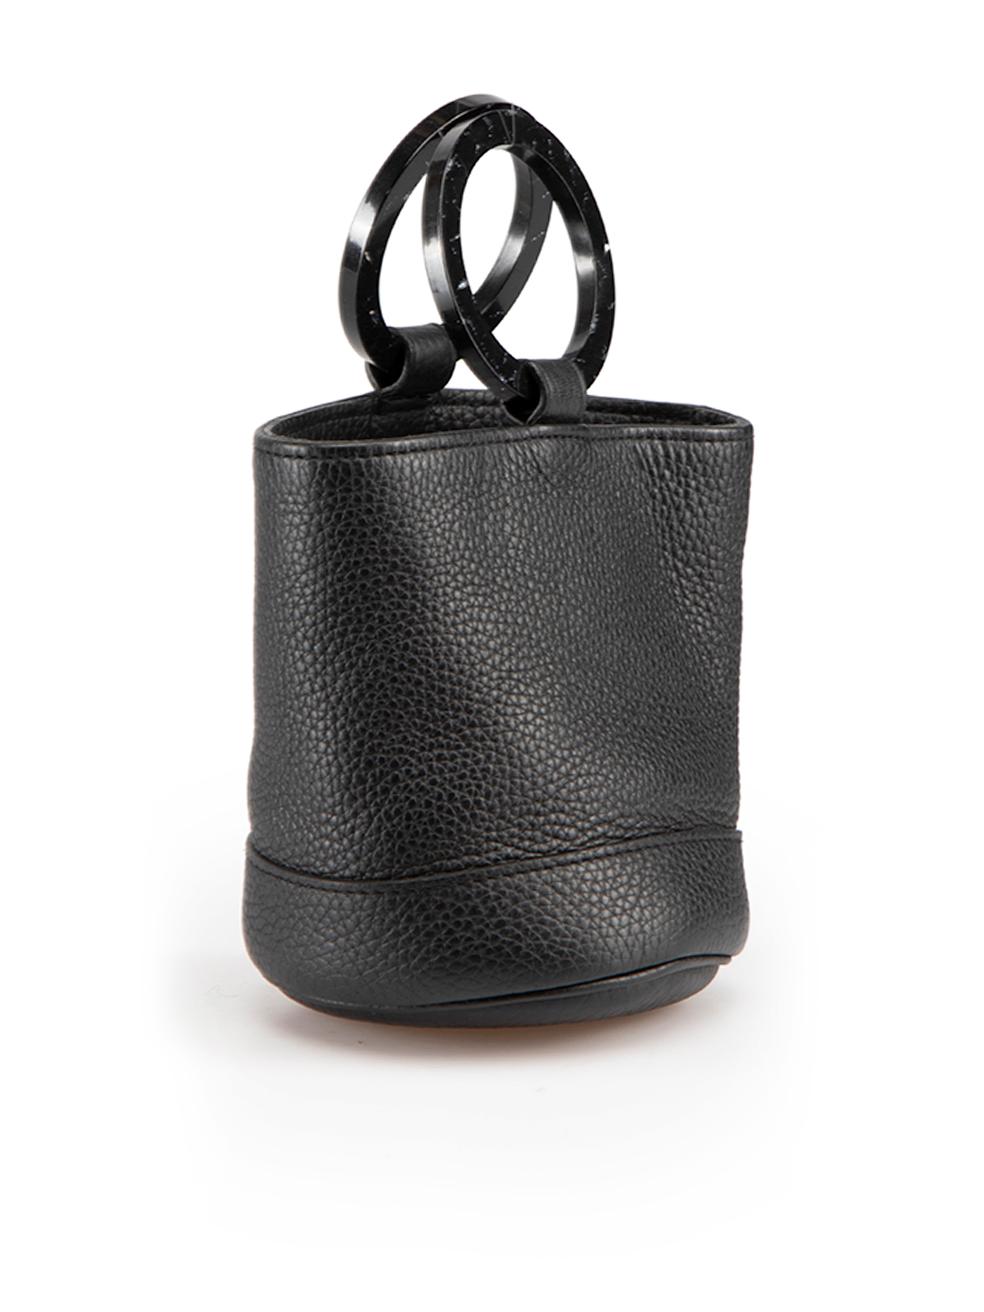 CONDITION is Very good. Hardly any visible wear to bag is evident on this used Simon Miller designer resale item. This item comes with original dust bag.
 
Details
Mini Bonsai
Black
Leather
Mini bucket bag
1x Main open compartment
2x Round